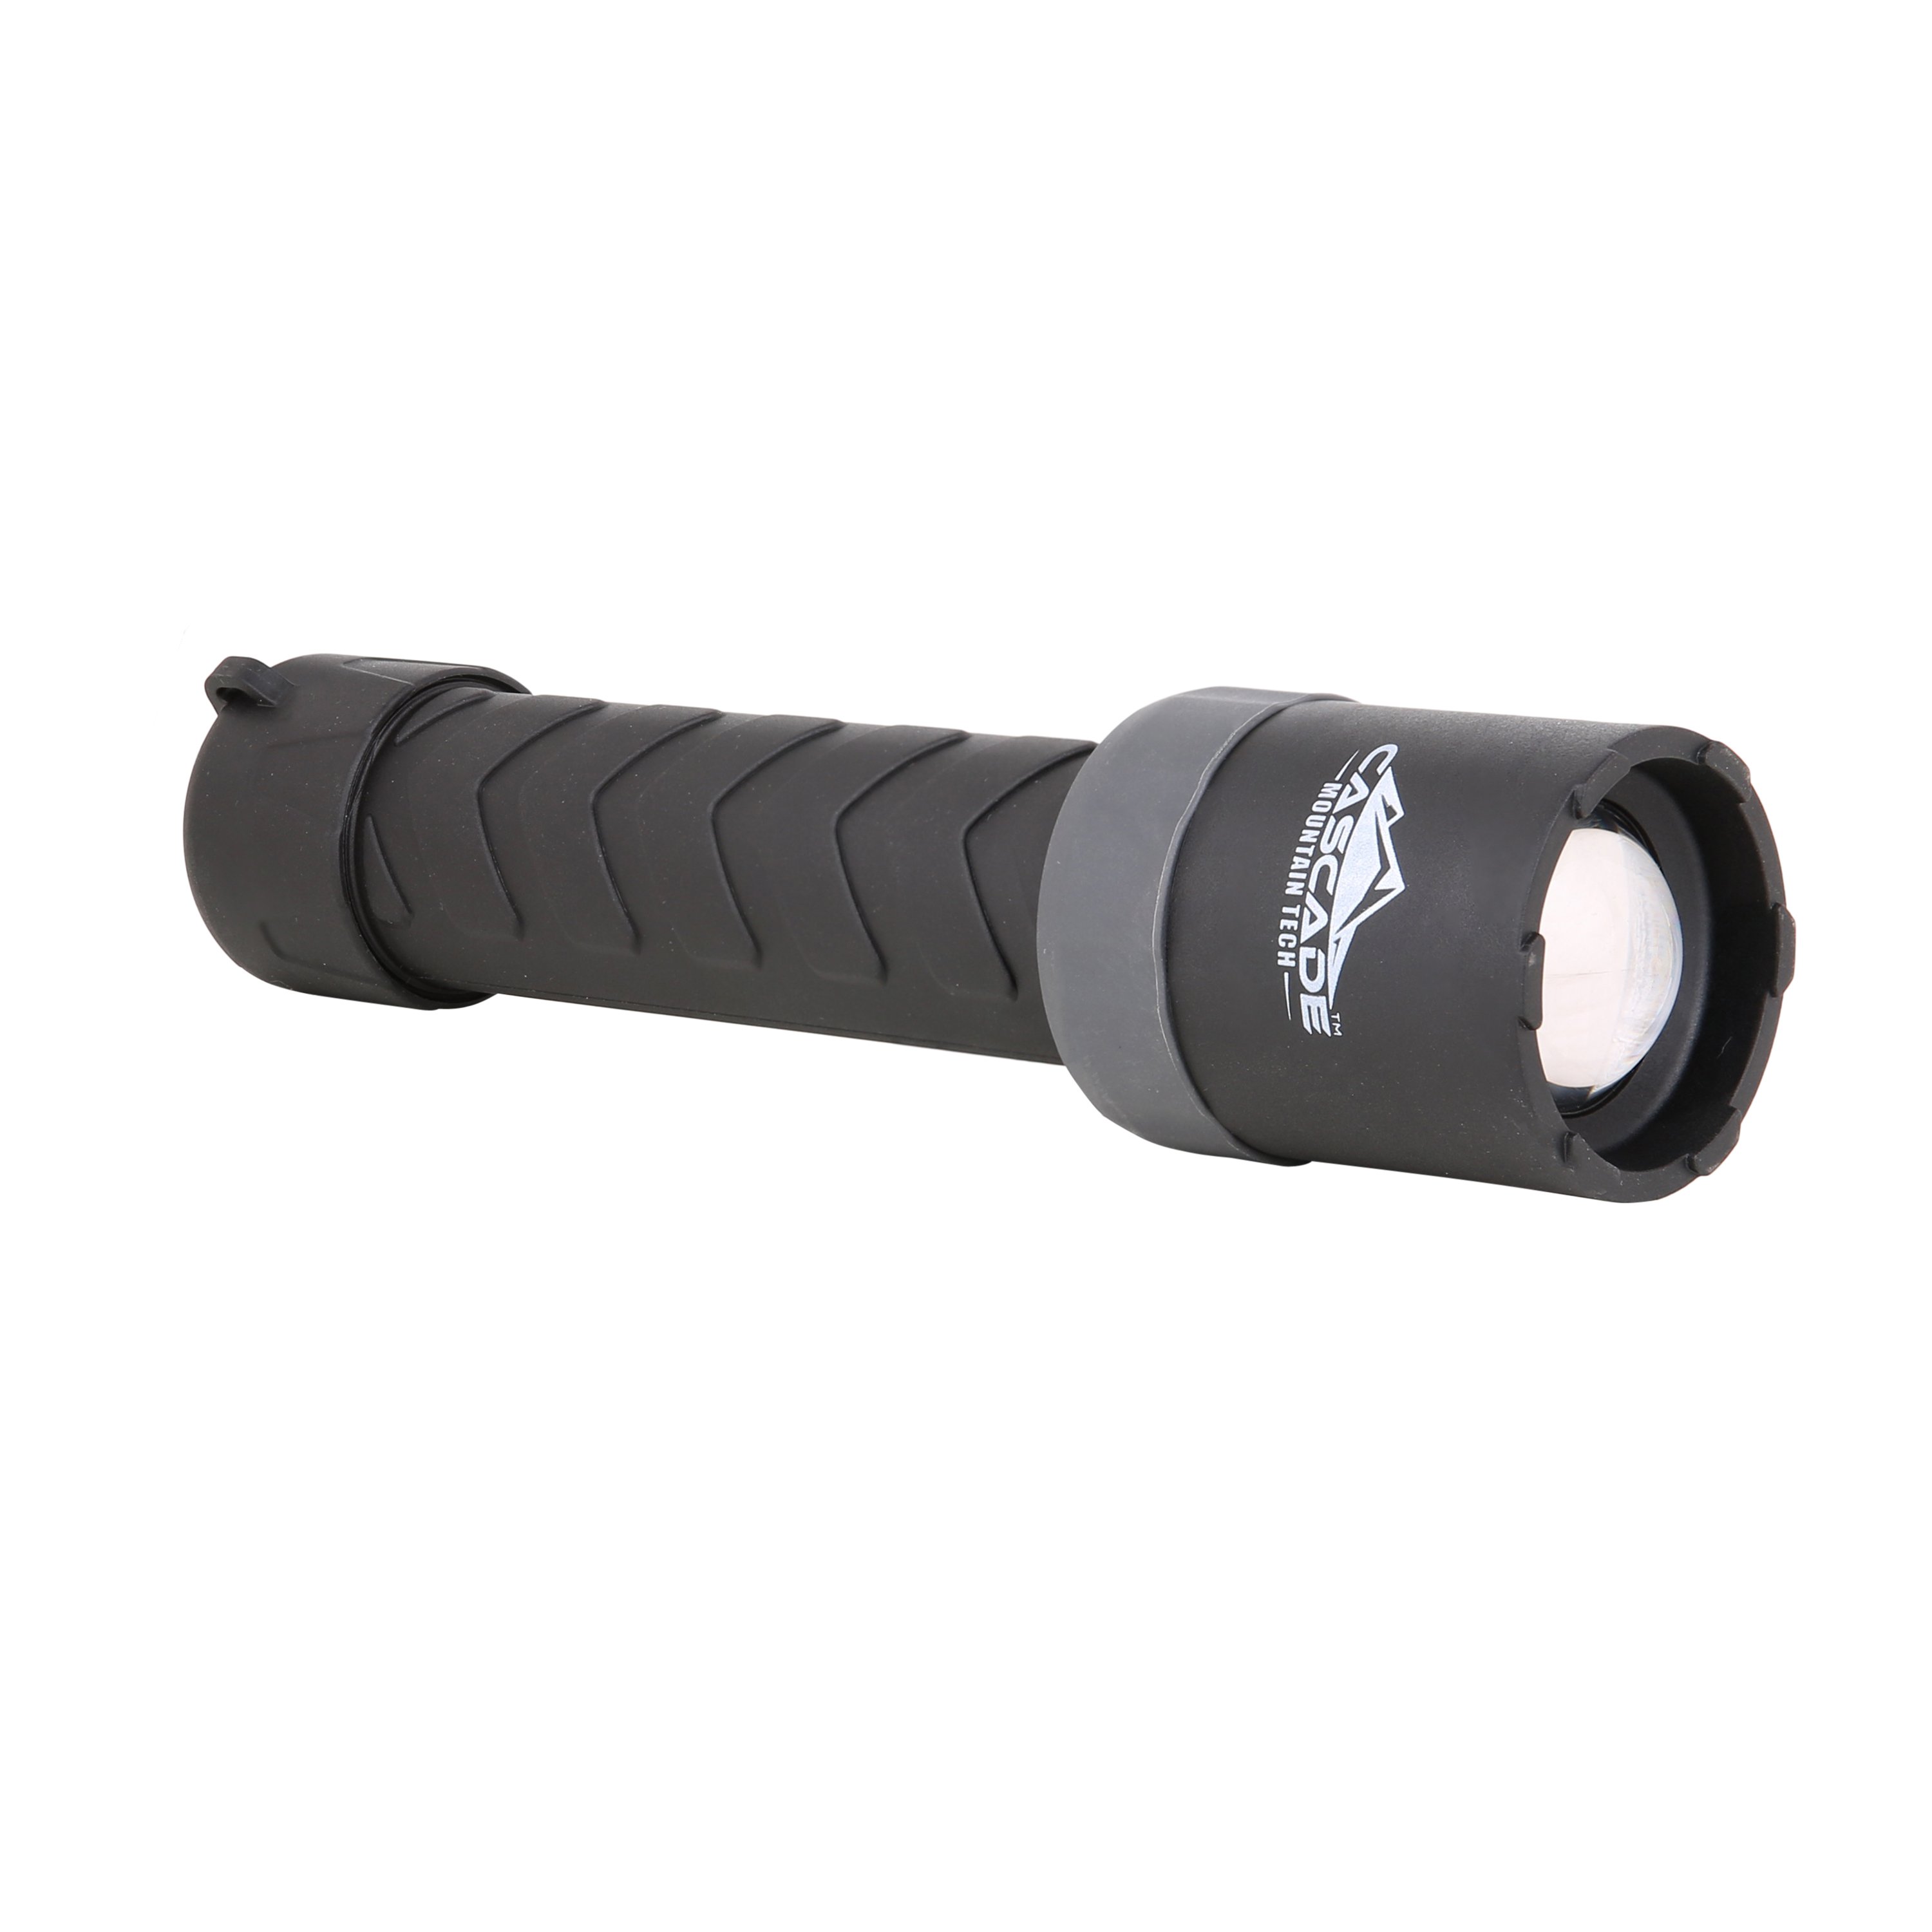 Cascade Mountain Tech STEELCORE™ LED Flashlight, with Emergency Strobe Feature, Light Output of 1000 L, Battery Size AA (Batteries Included) – Dark Grey - image 1 of 4